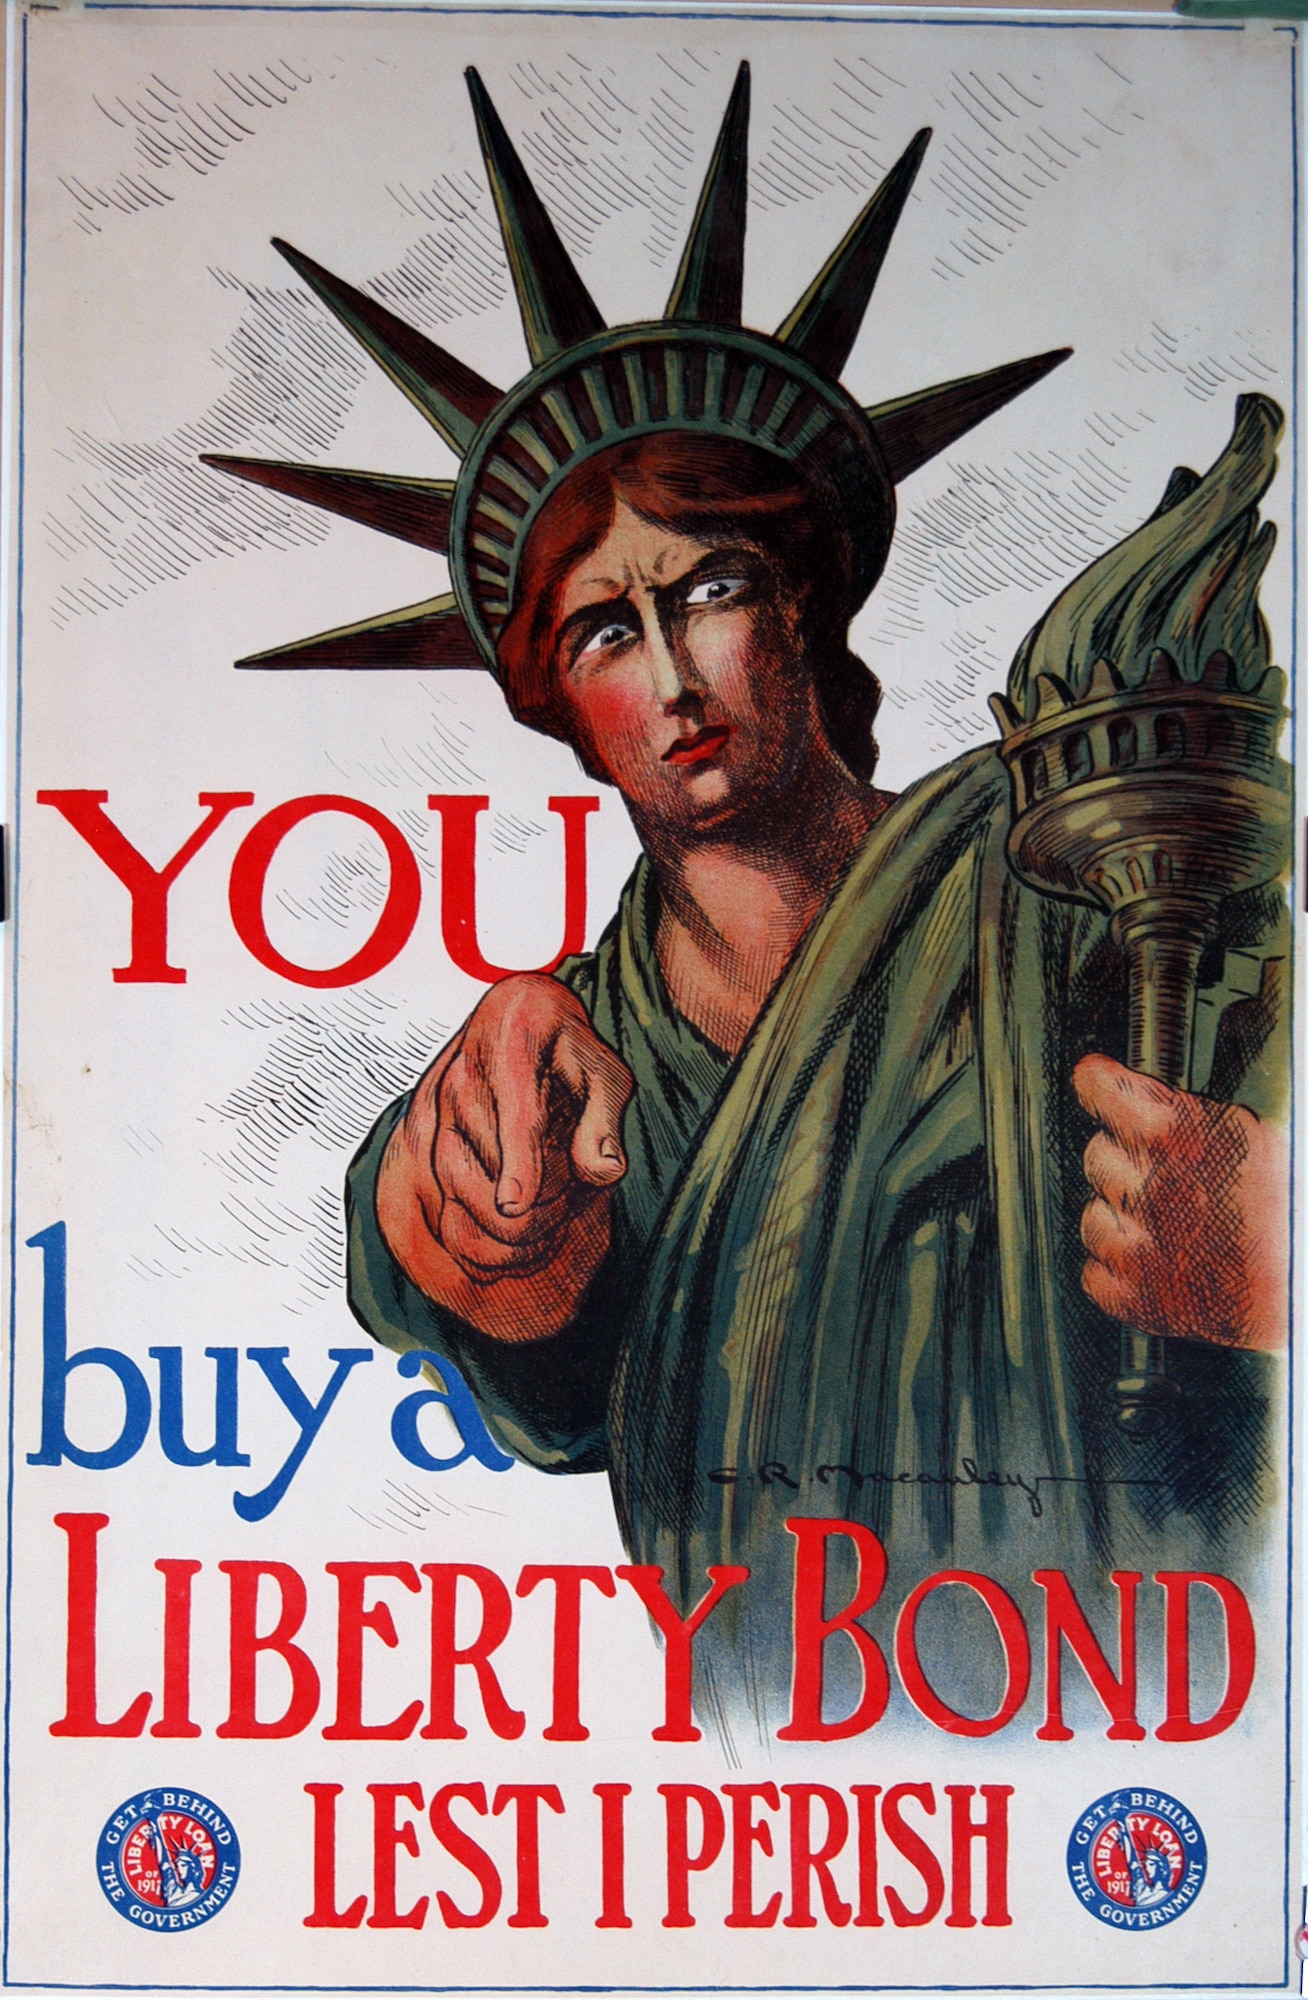 The posters created during World War I often reinforced the idea that it was every individual’s responsibility to support the war effort.   The artist of this poster, Charles Raymond Macauley, combined a simple message with powerful imagery in support of the First Liberty Loan campaign, which began in April, 1917.